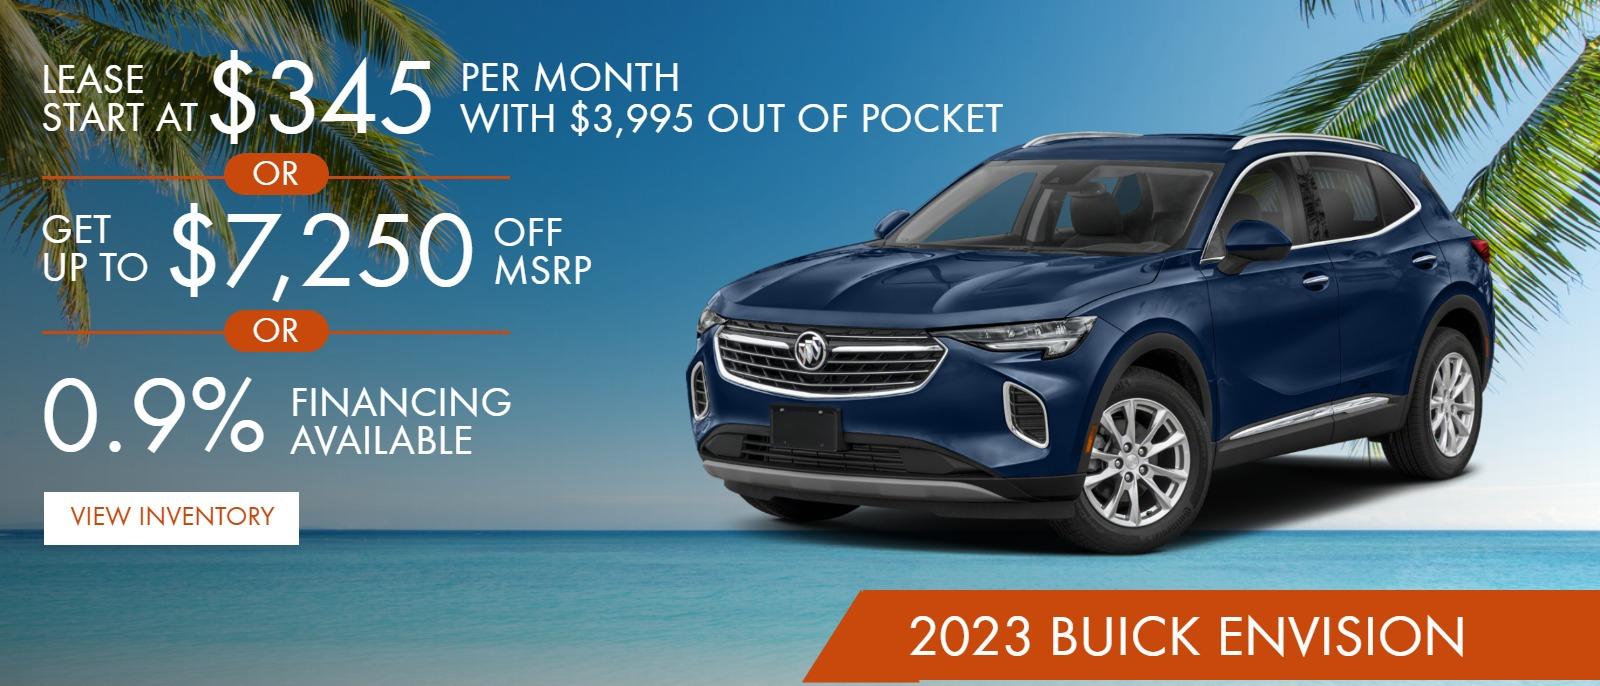 2023 Buick Envision
Leasses Start at $345 per month with $3995 out of pocket ***
Get up to $7250 off *
0.9% Financing Available**